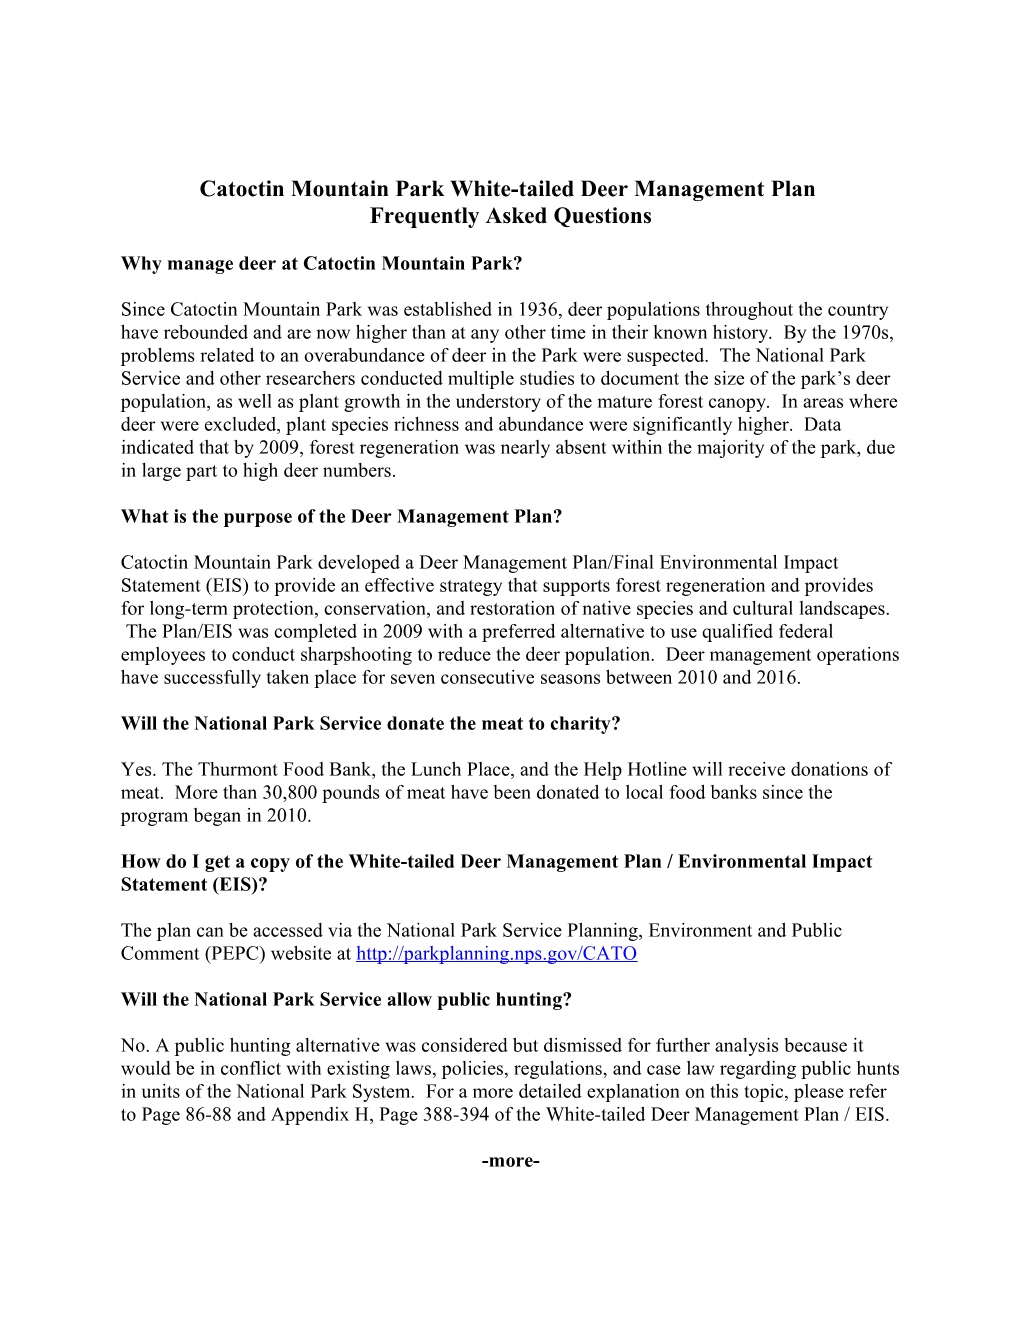 Catoctin Mountain Park White-Tailed Deer Management Plan